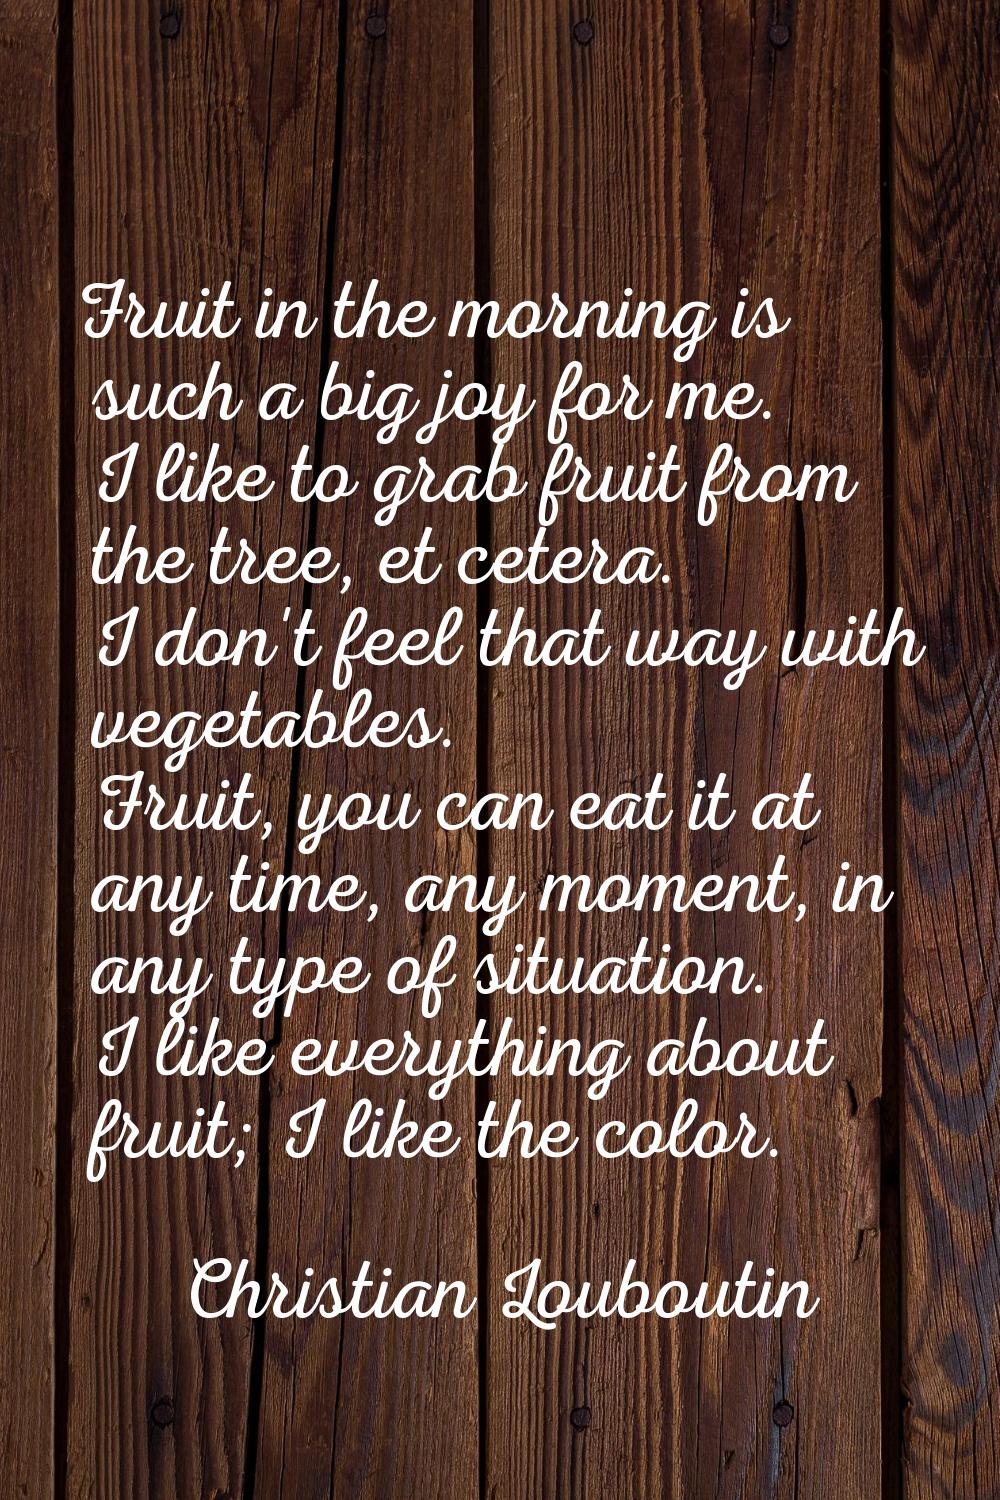 Fruit in the morning is such a big joy for me. I like to grab fruit from the tree, et cetera. I don